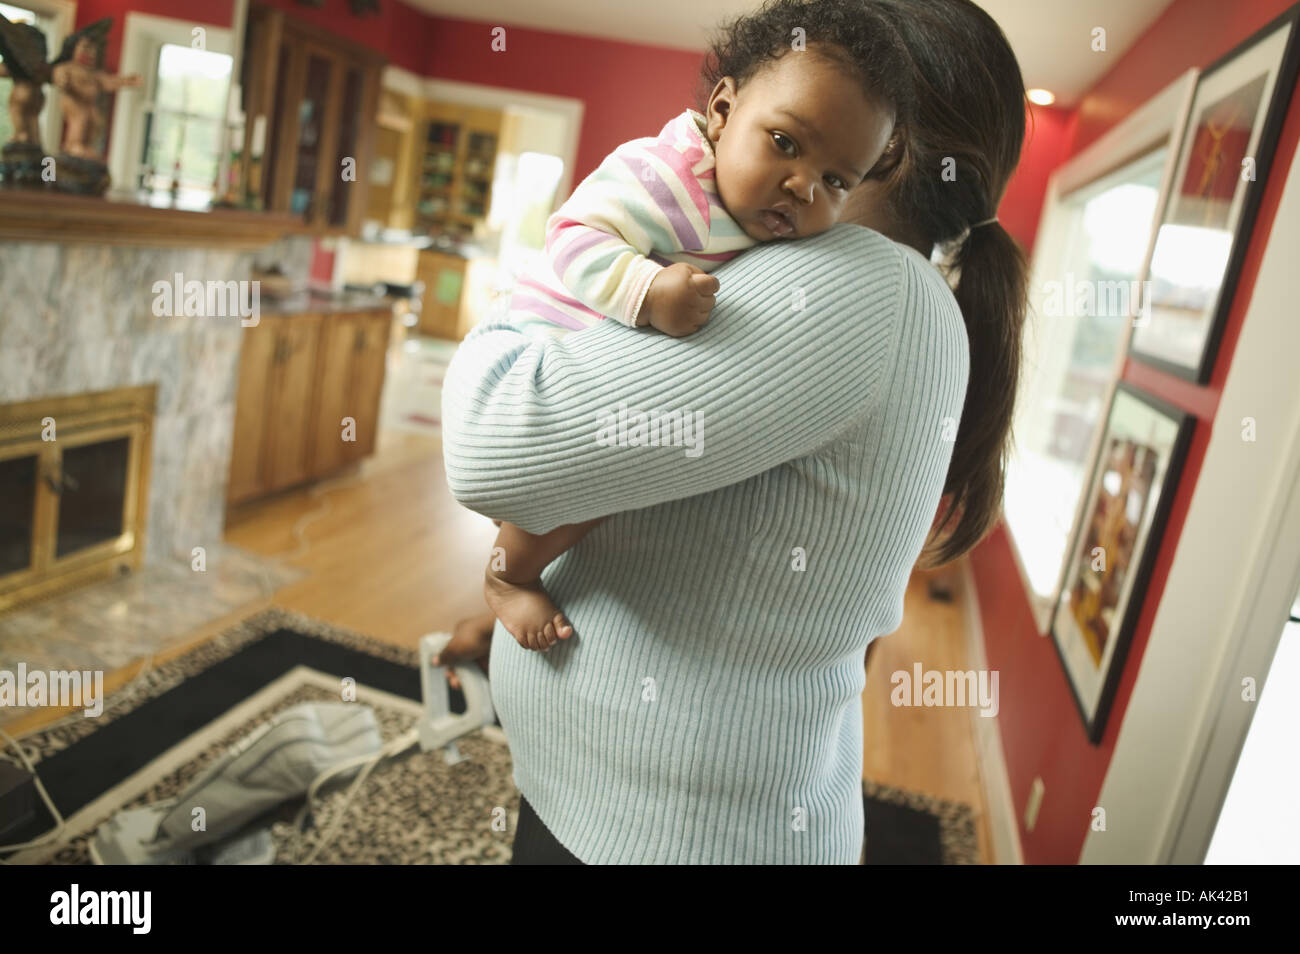 Woman holds baby while vacuuming Stock Photo